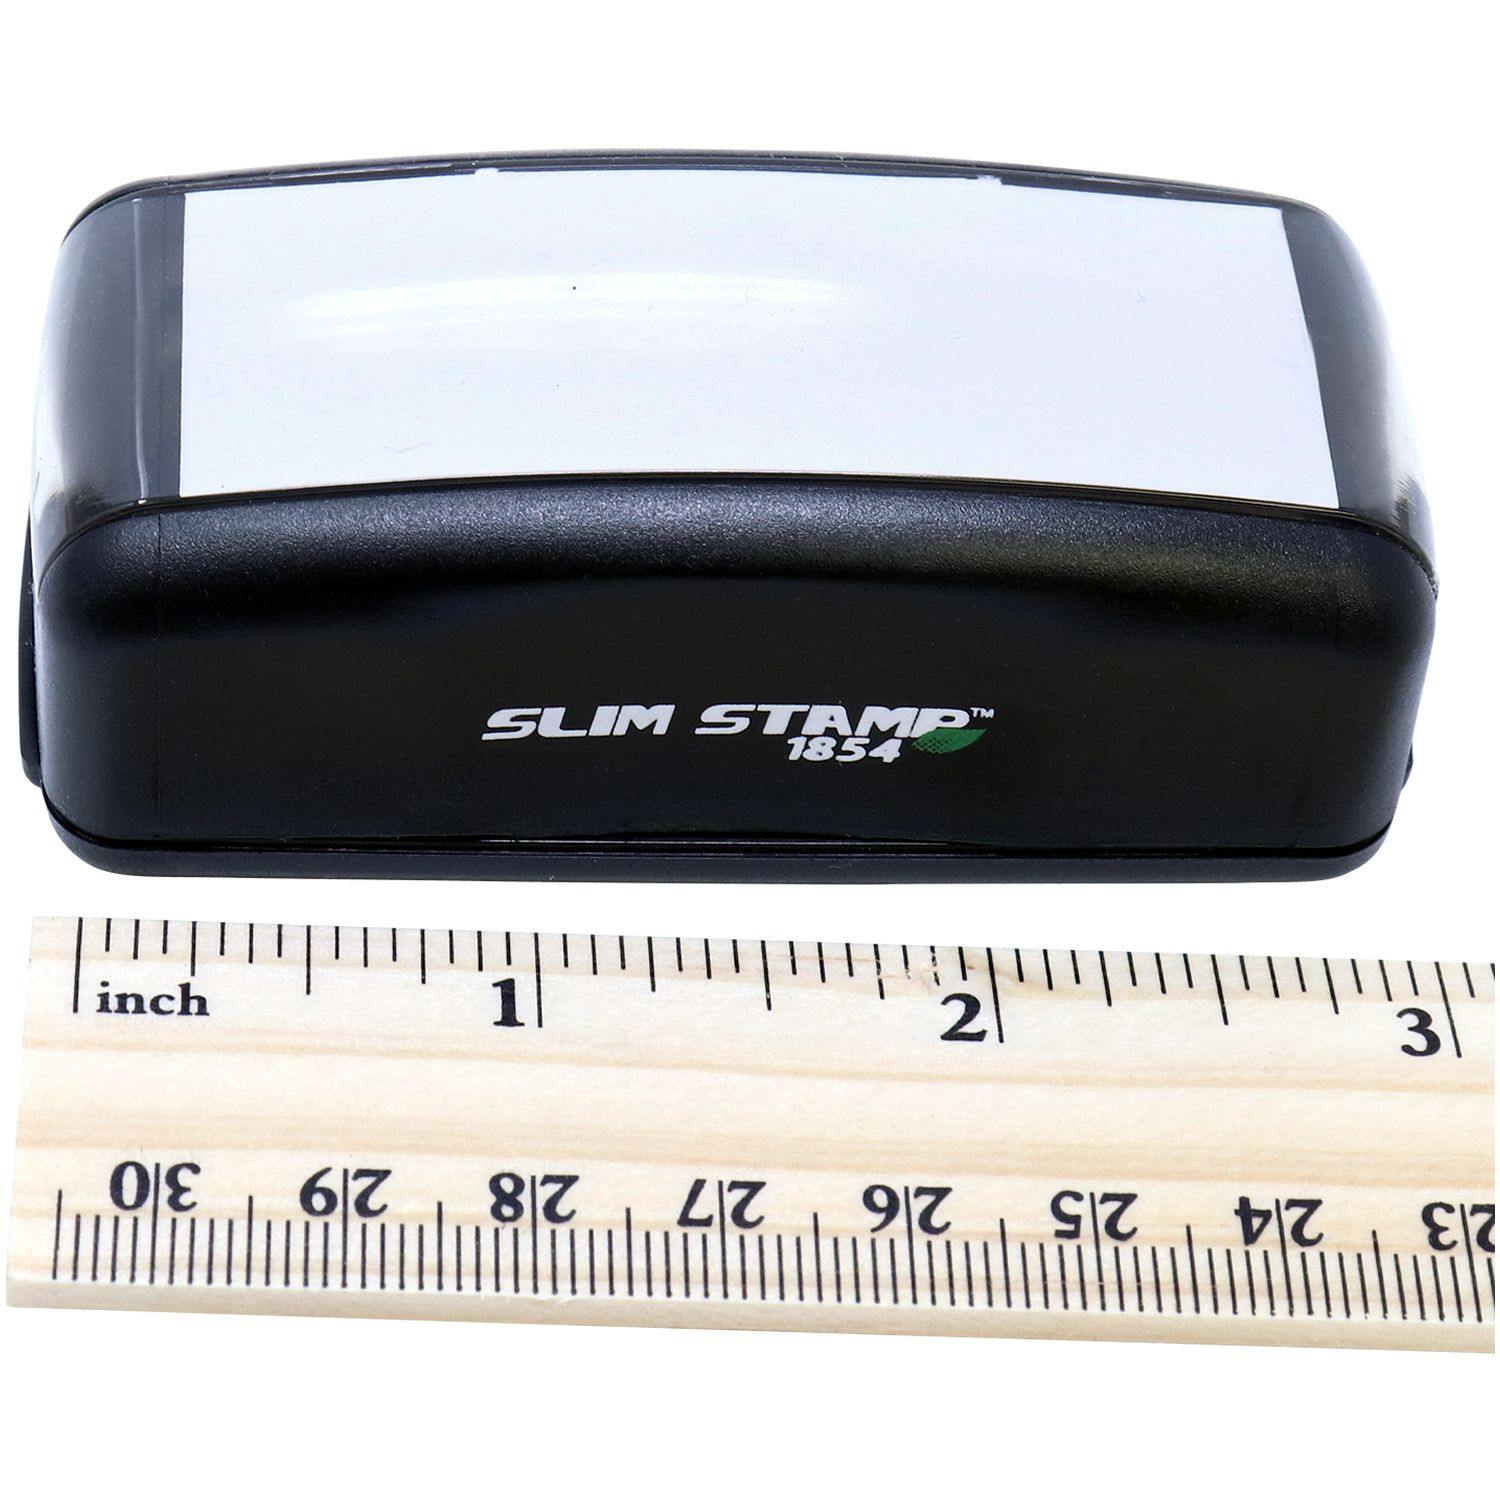 Measurement Large Pre Inked Application Complete Stamp with Ruler